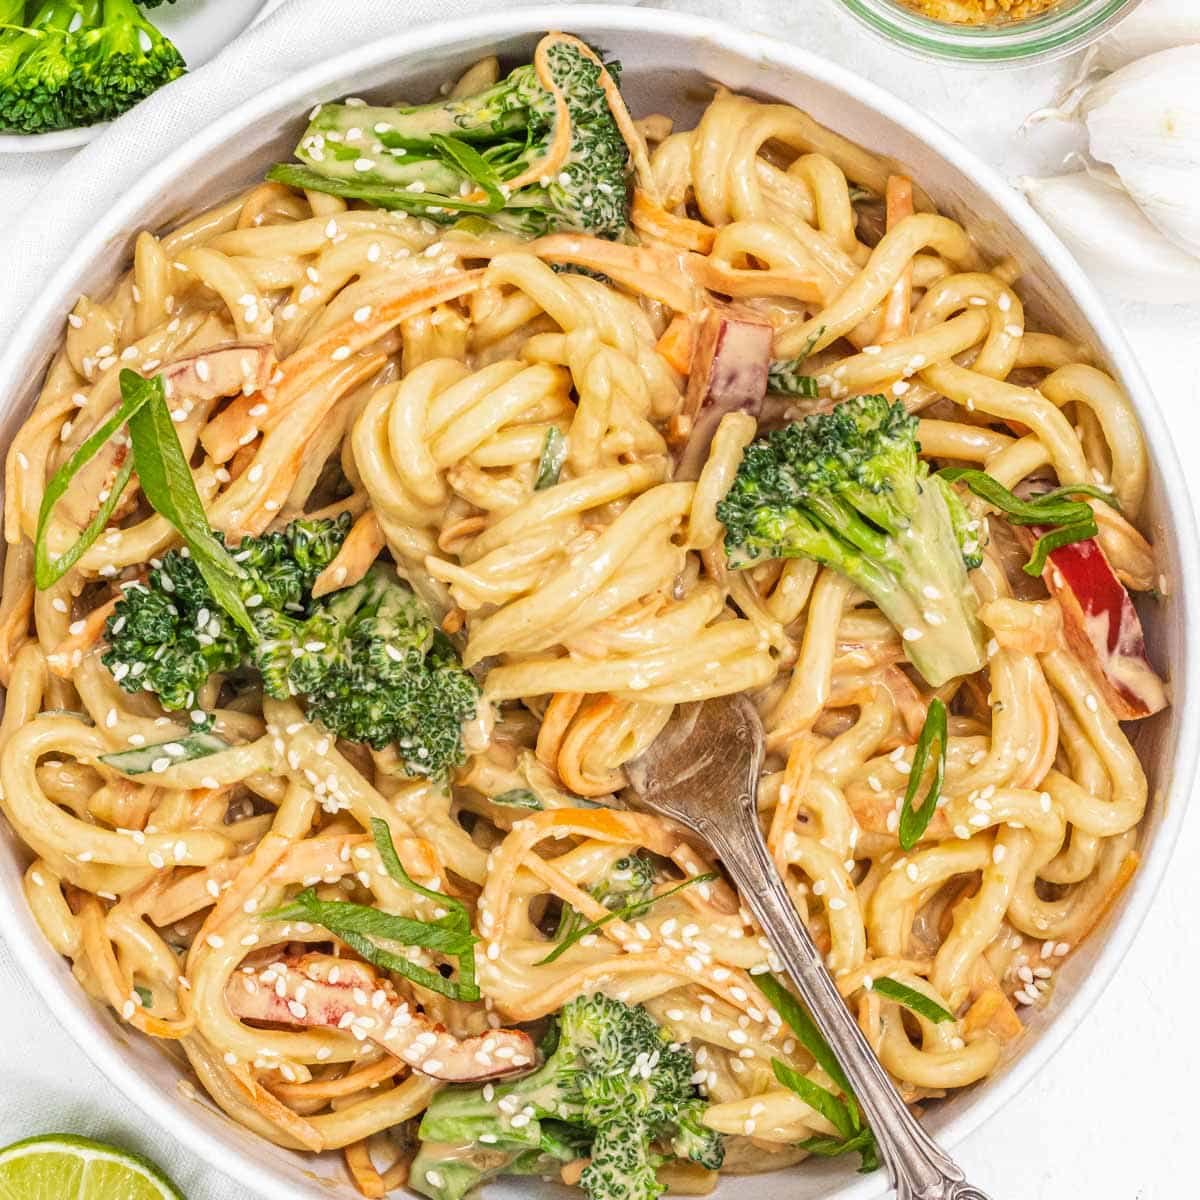 Peanut noodles with broccoli and sesame seeds